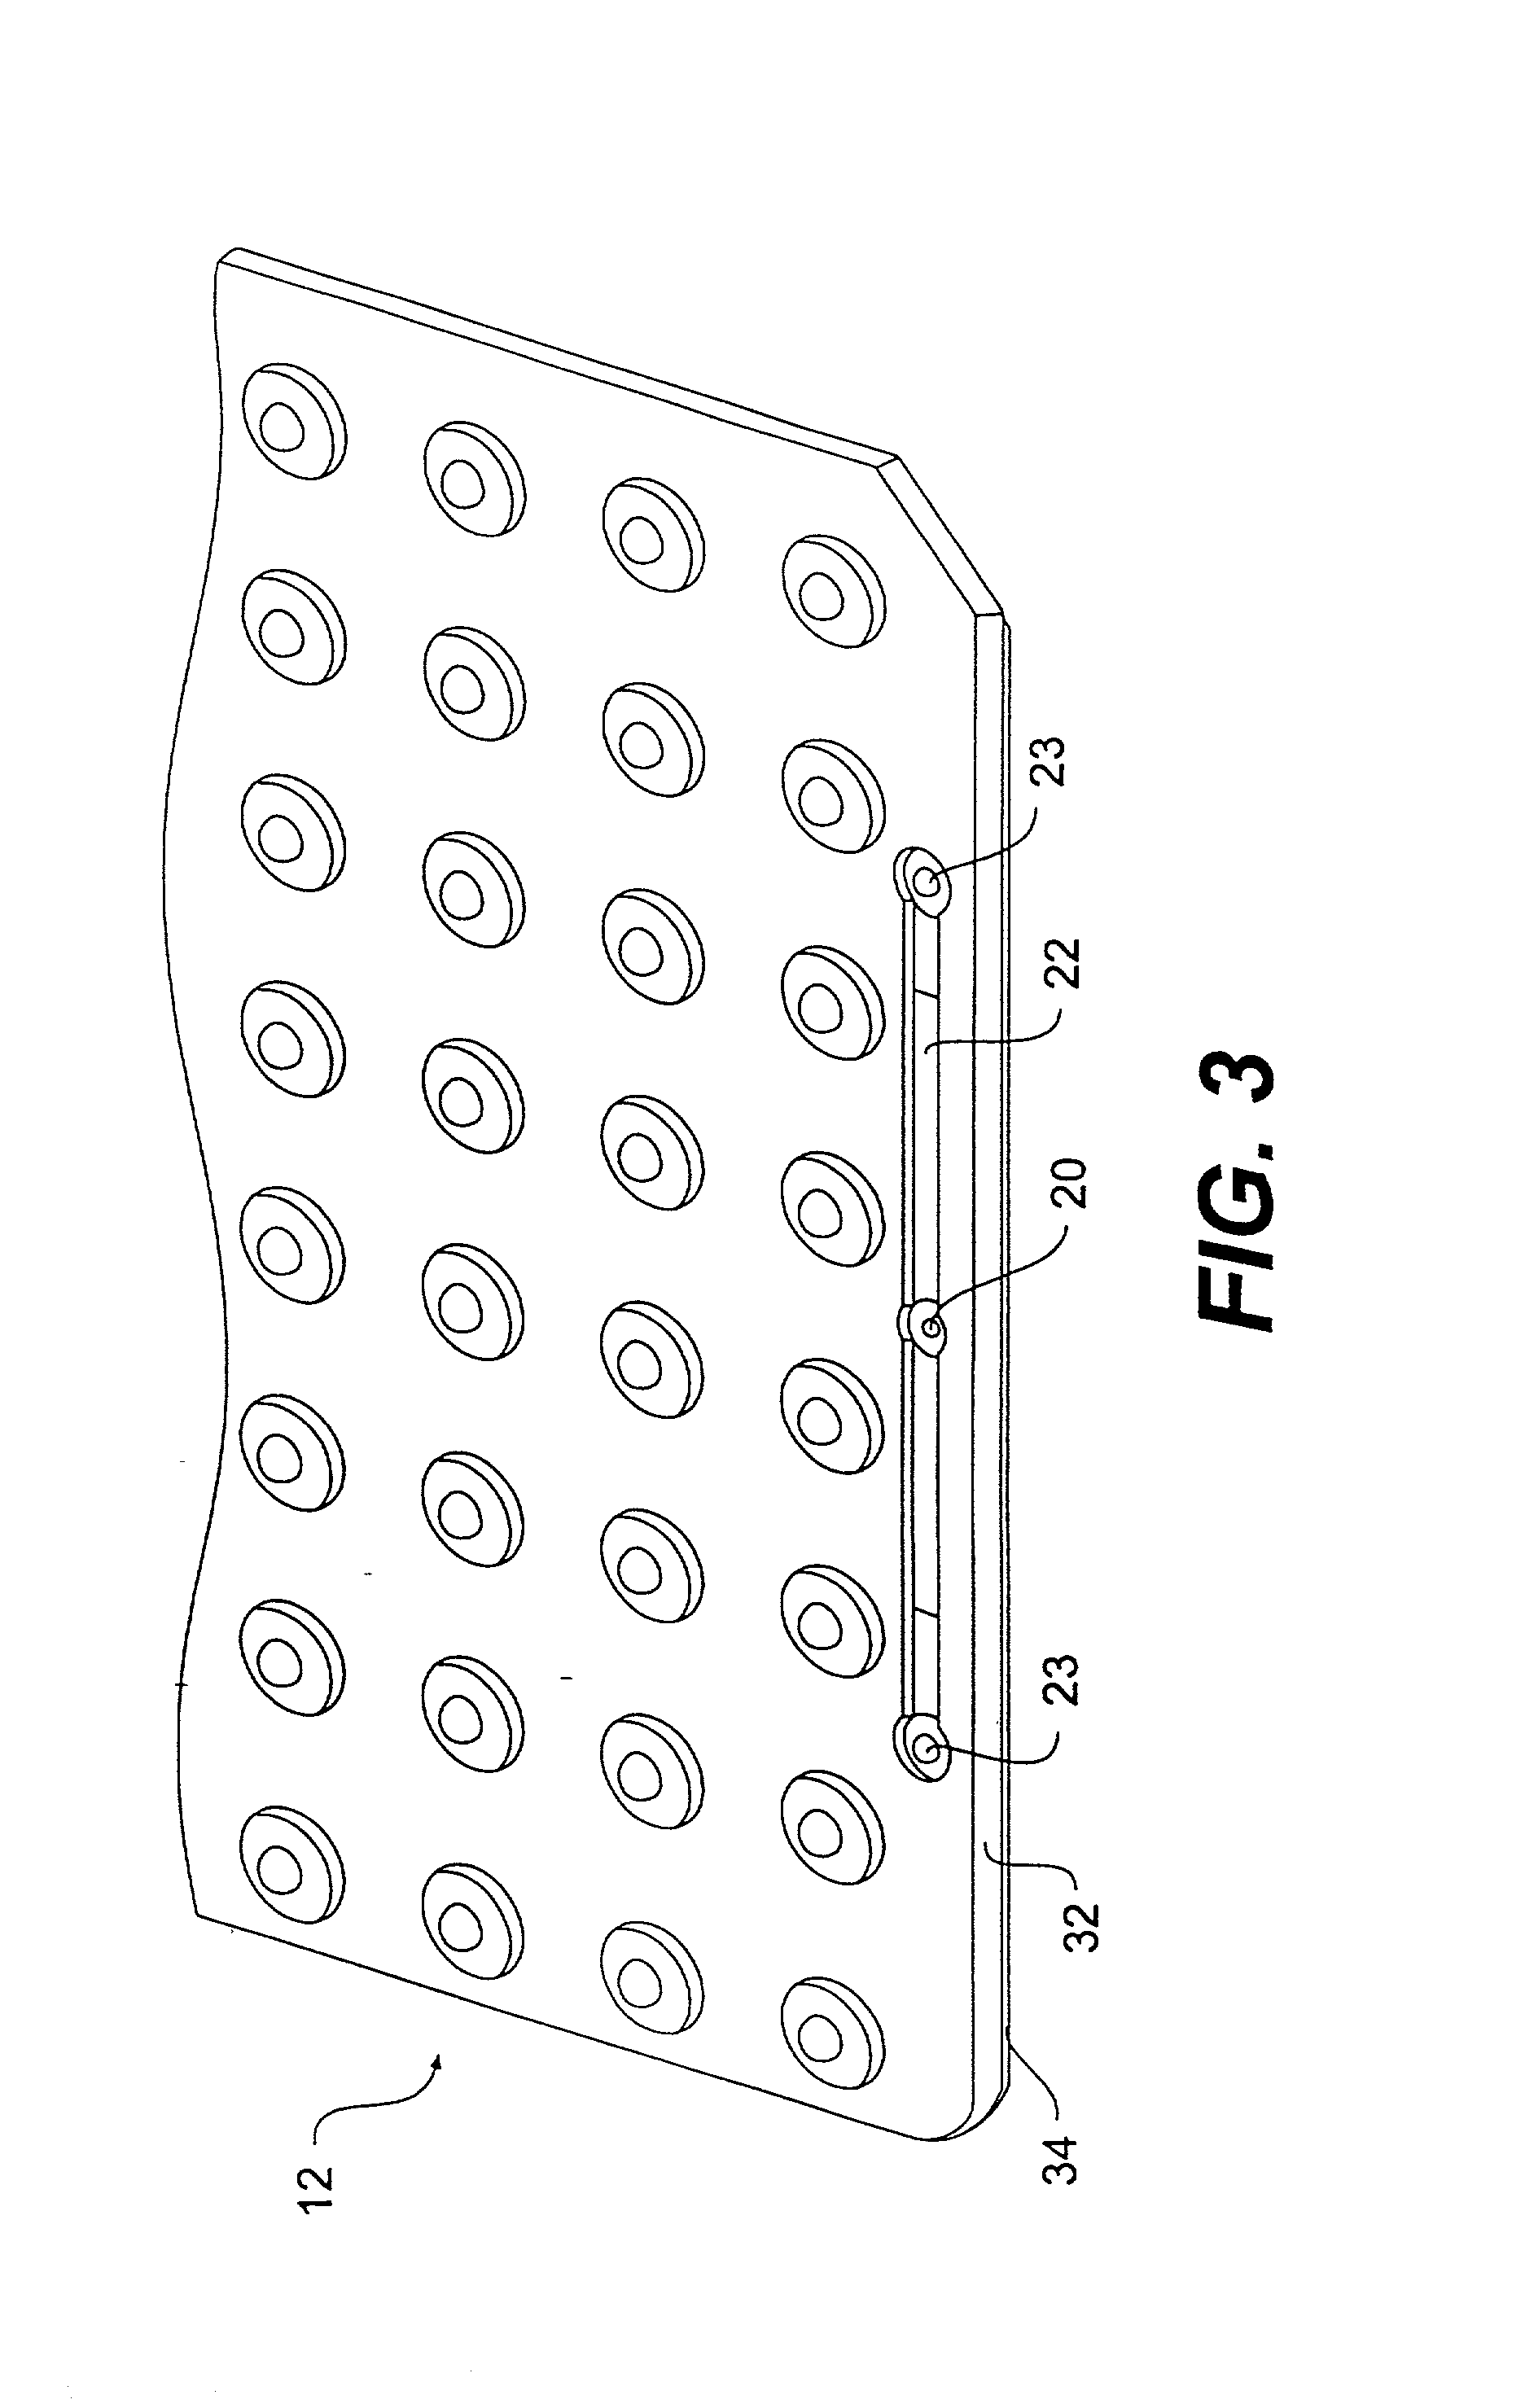 System and method for filling a substrate with a liquid sample